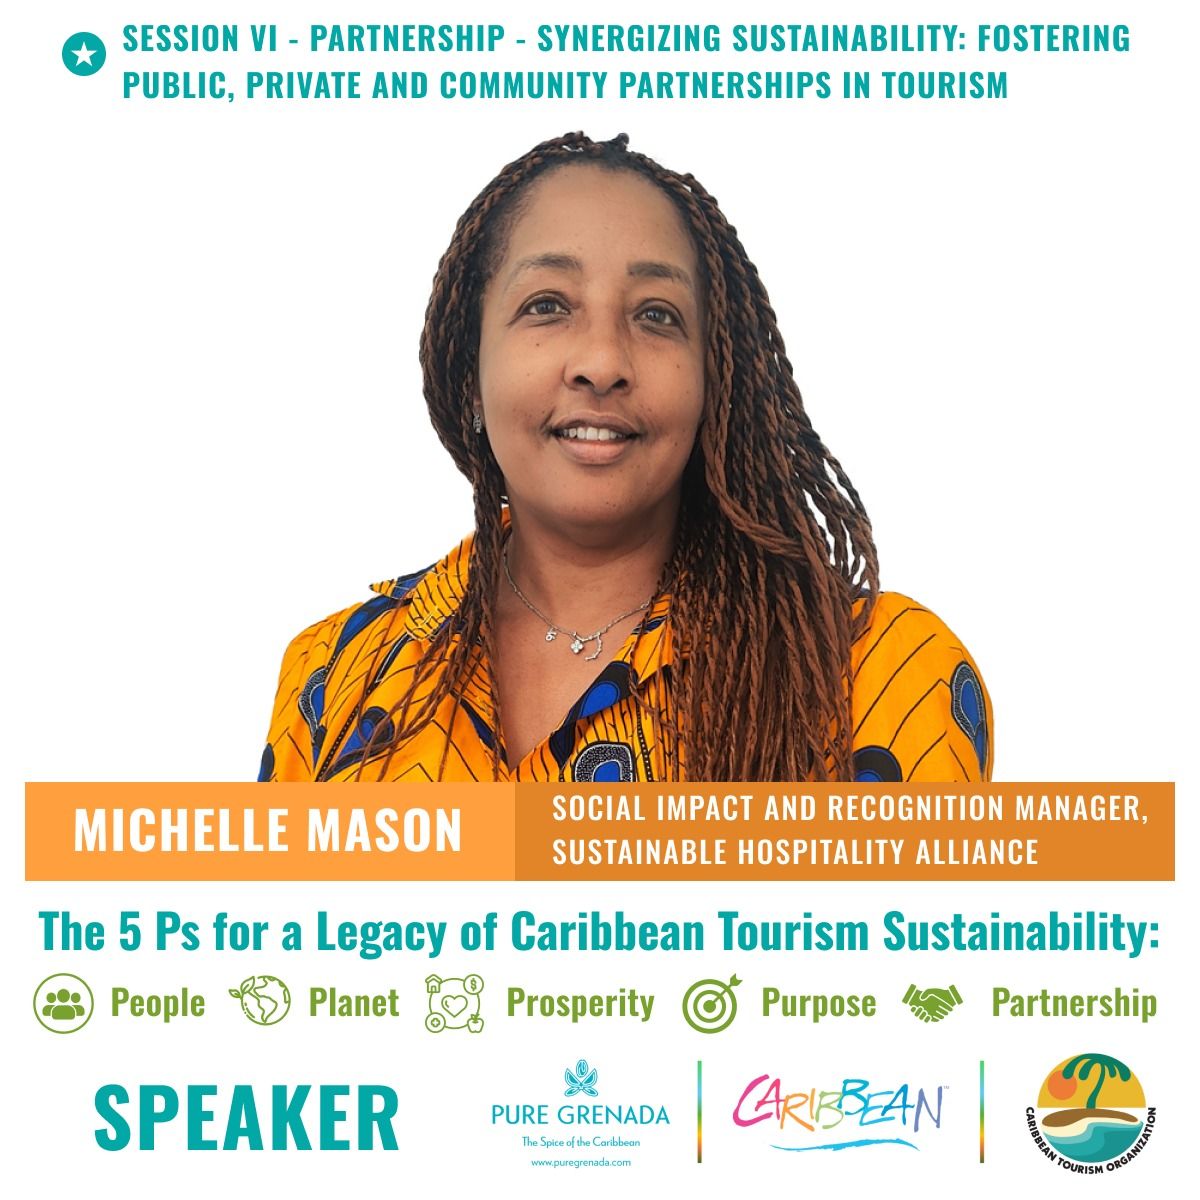 Today our Programme Manager, Michelle Mason, and #CEO, @GWMandziuk are speaking at the #Caribbean Conference of #SustainableTourism Development.

Together, they will detail the transformative power of multi-stakeholder #partnerships in advancing #sustainability.

#NetPositive